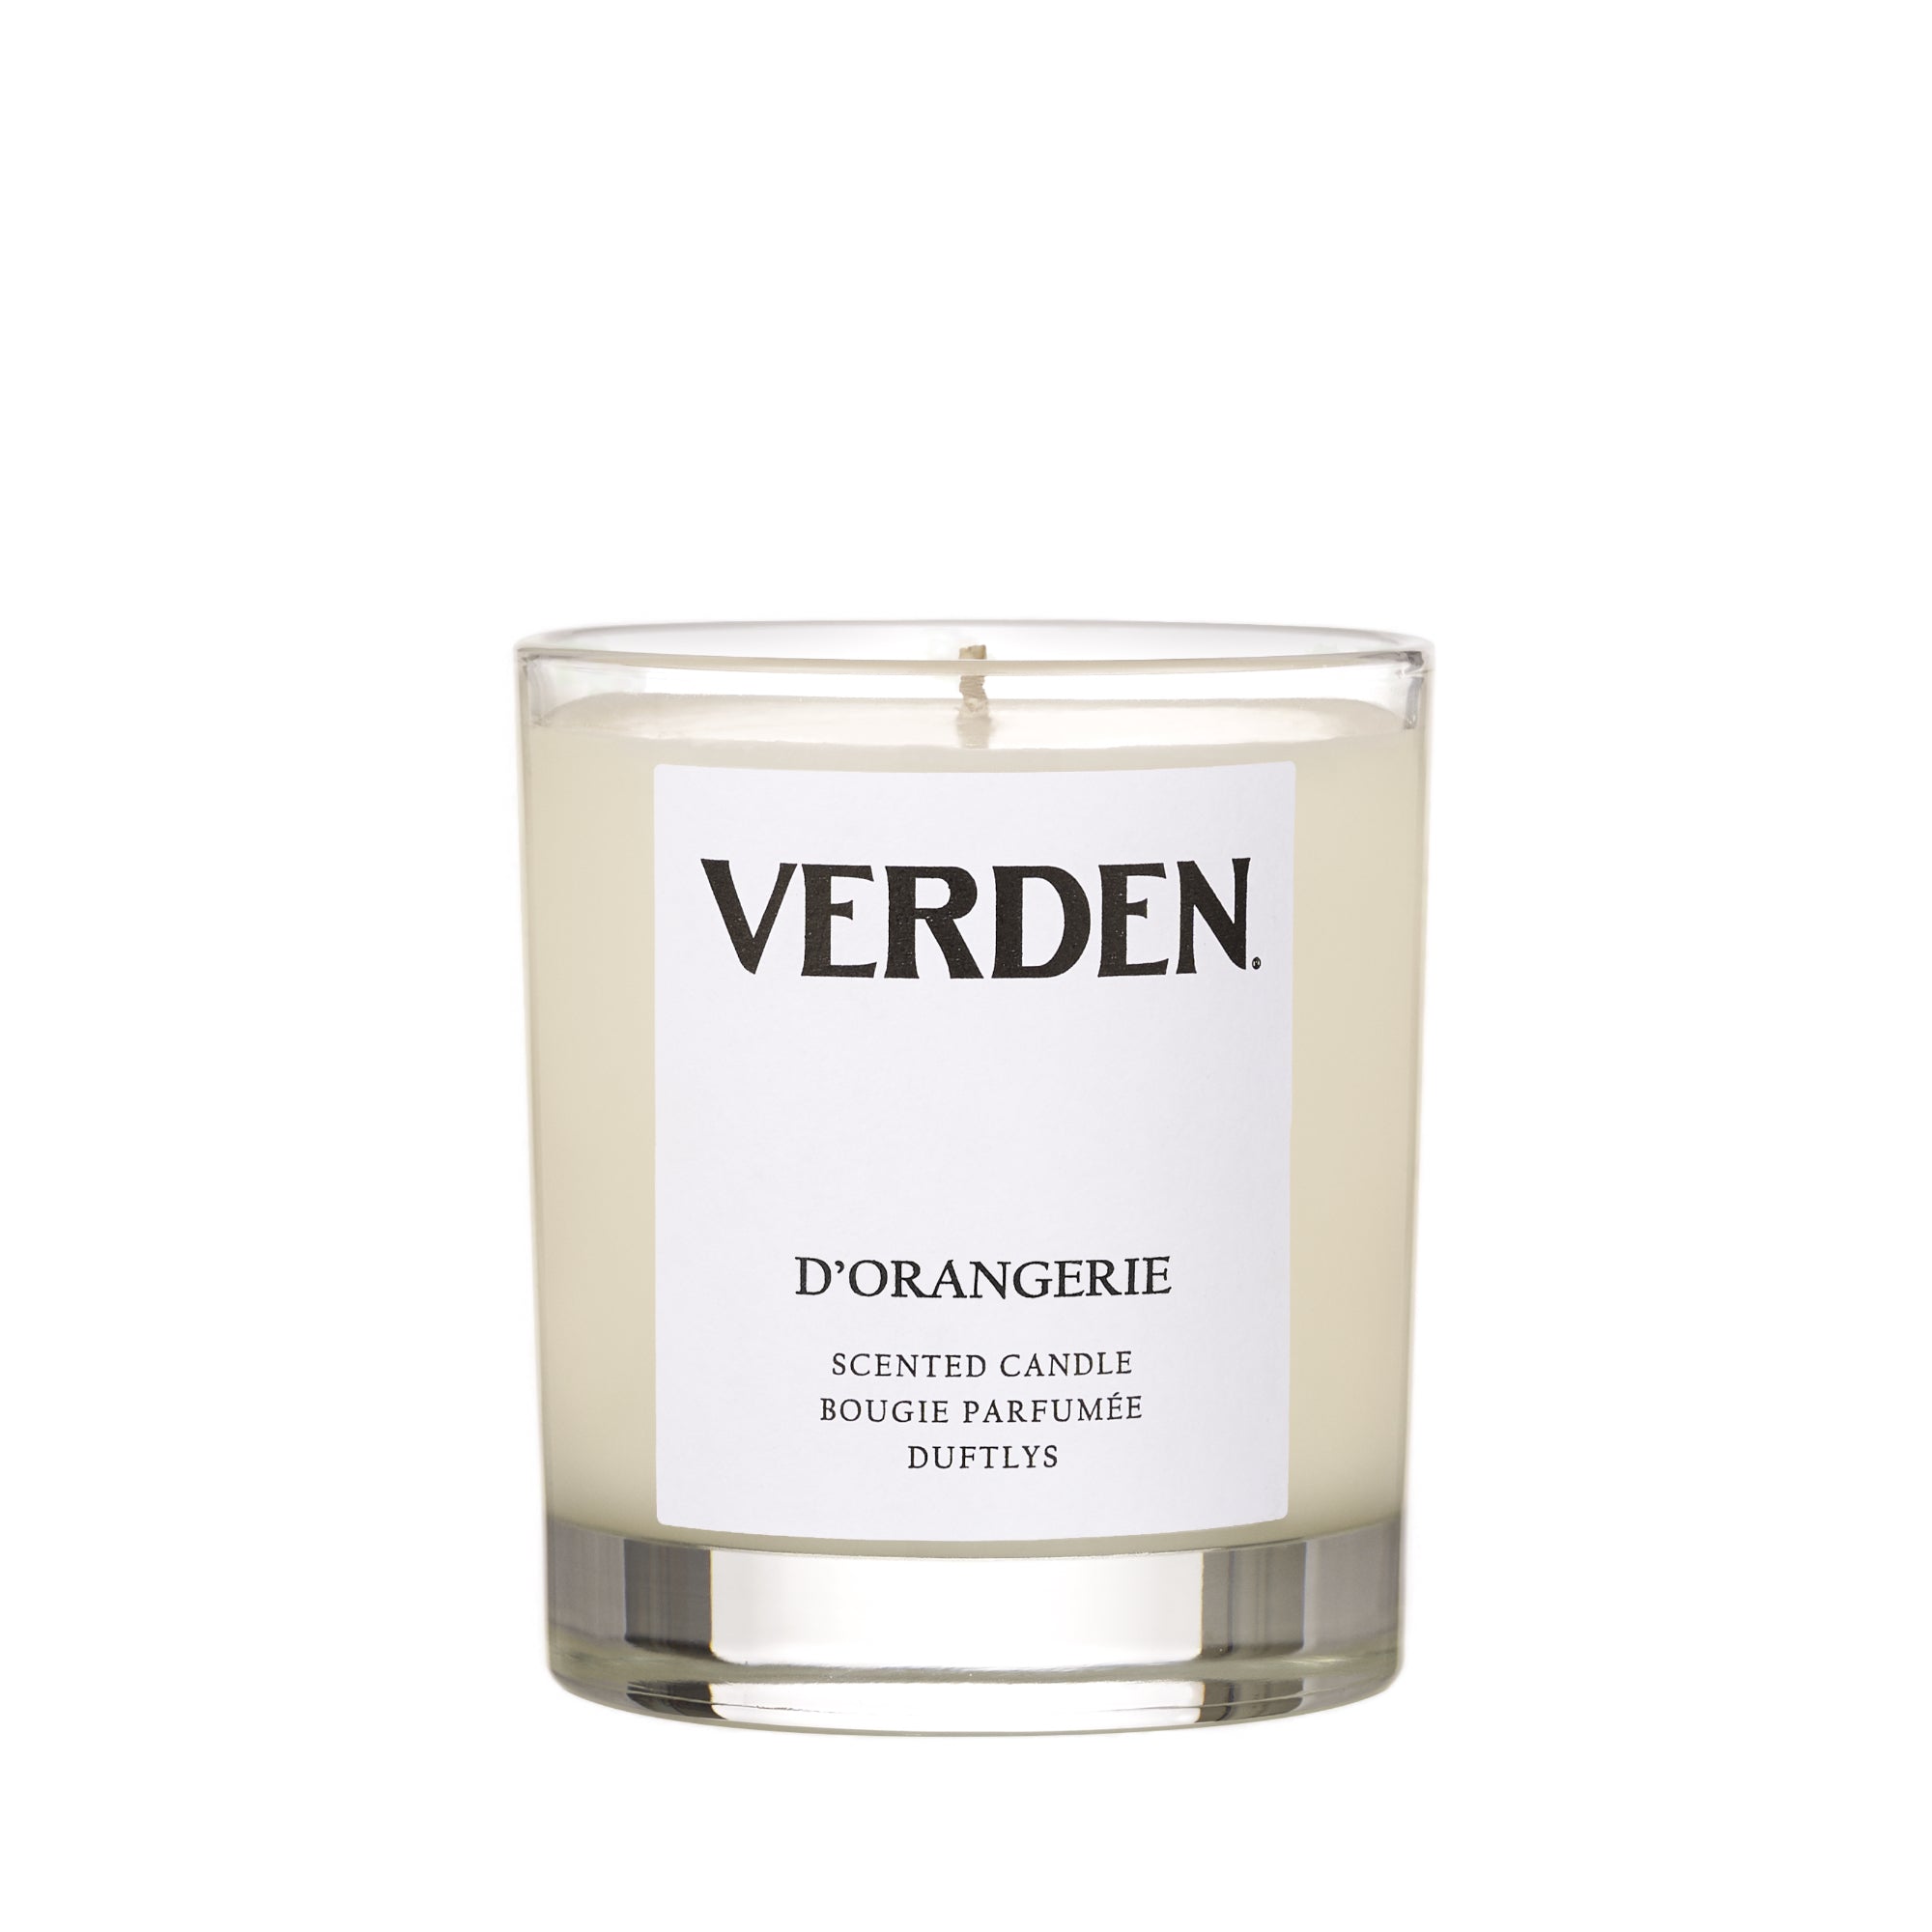 Scented Candle D'Orangerie